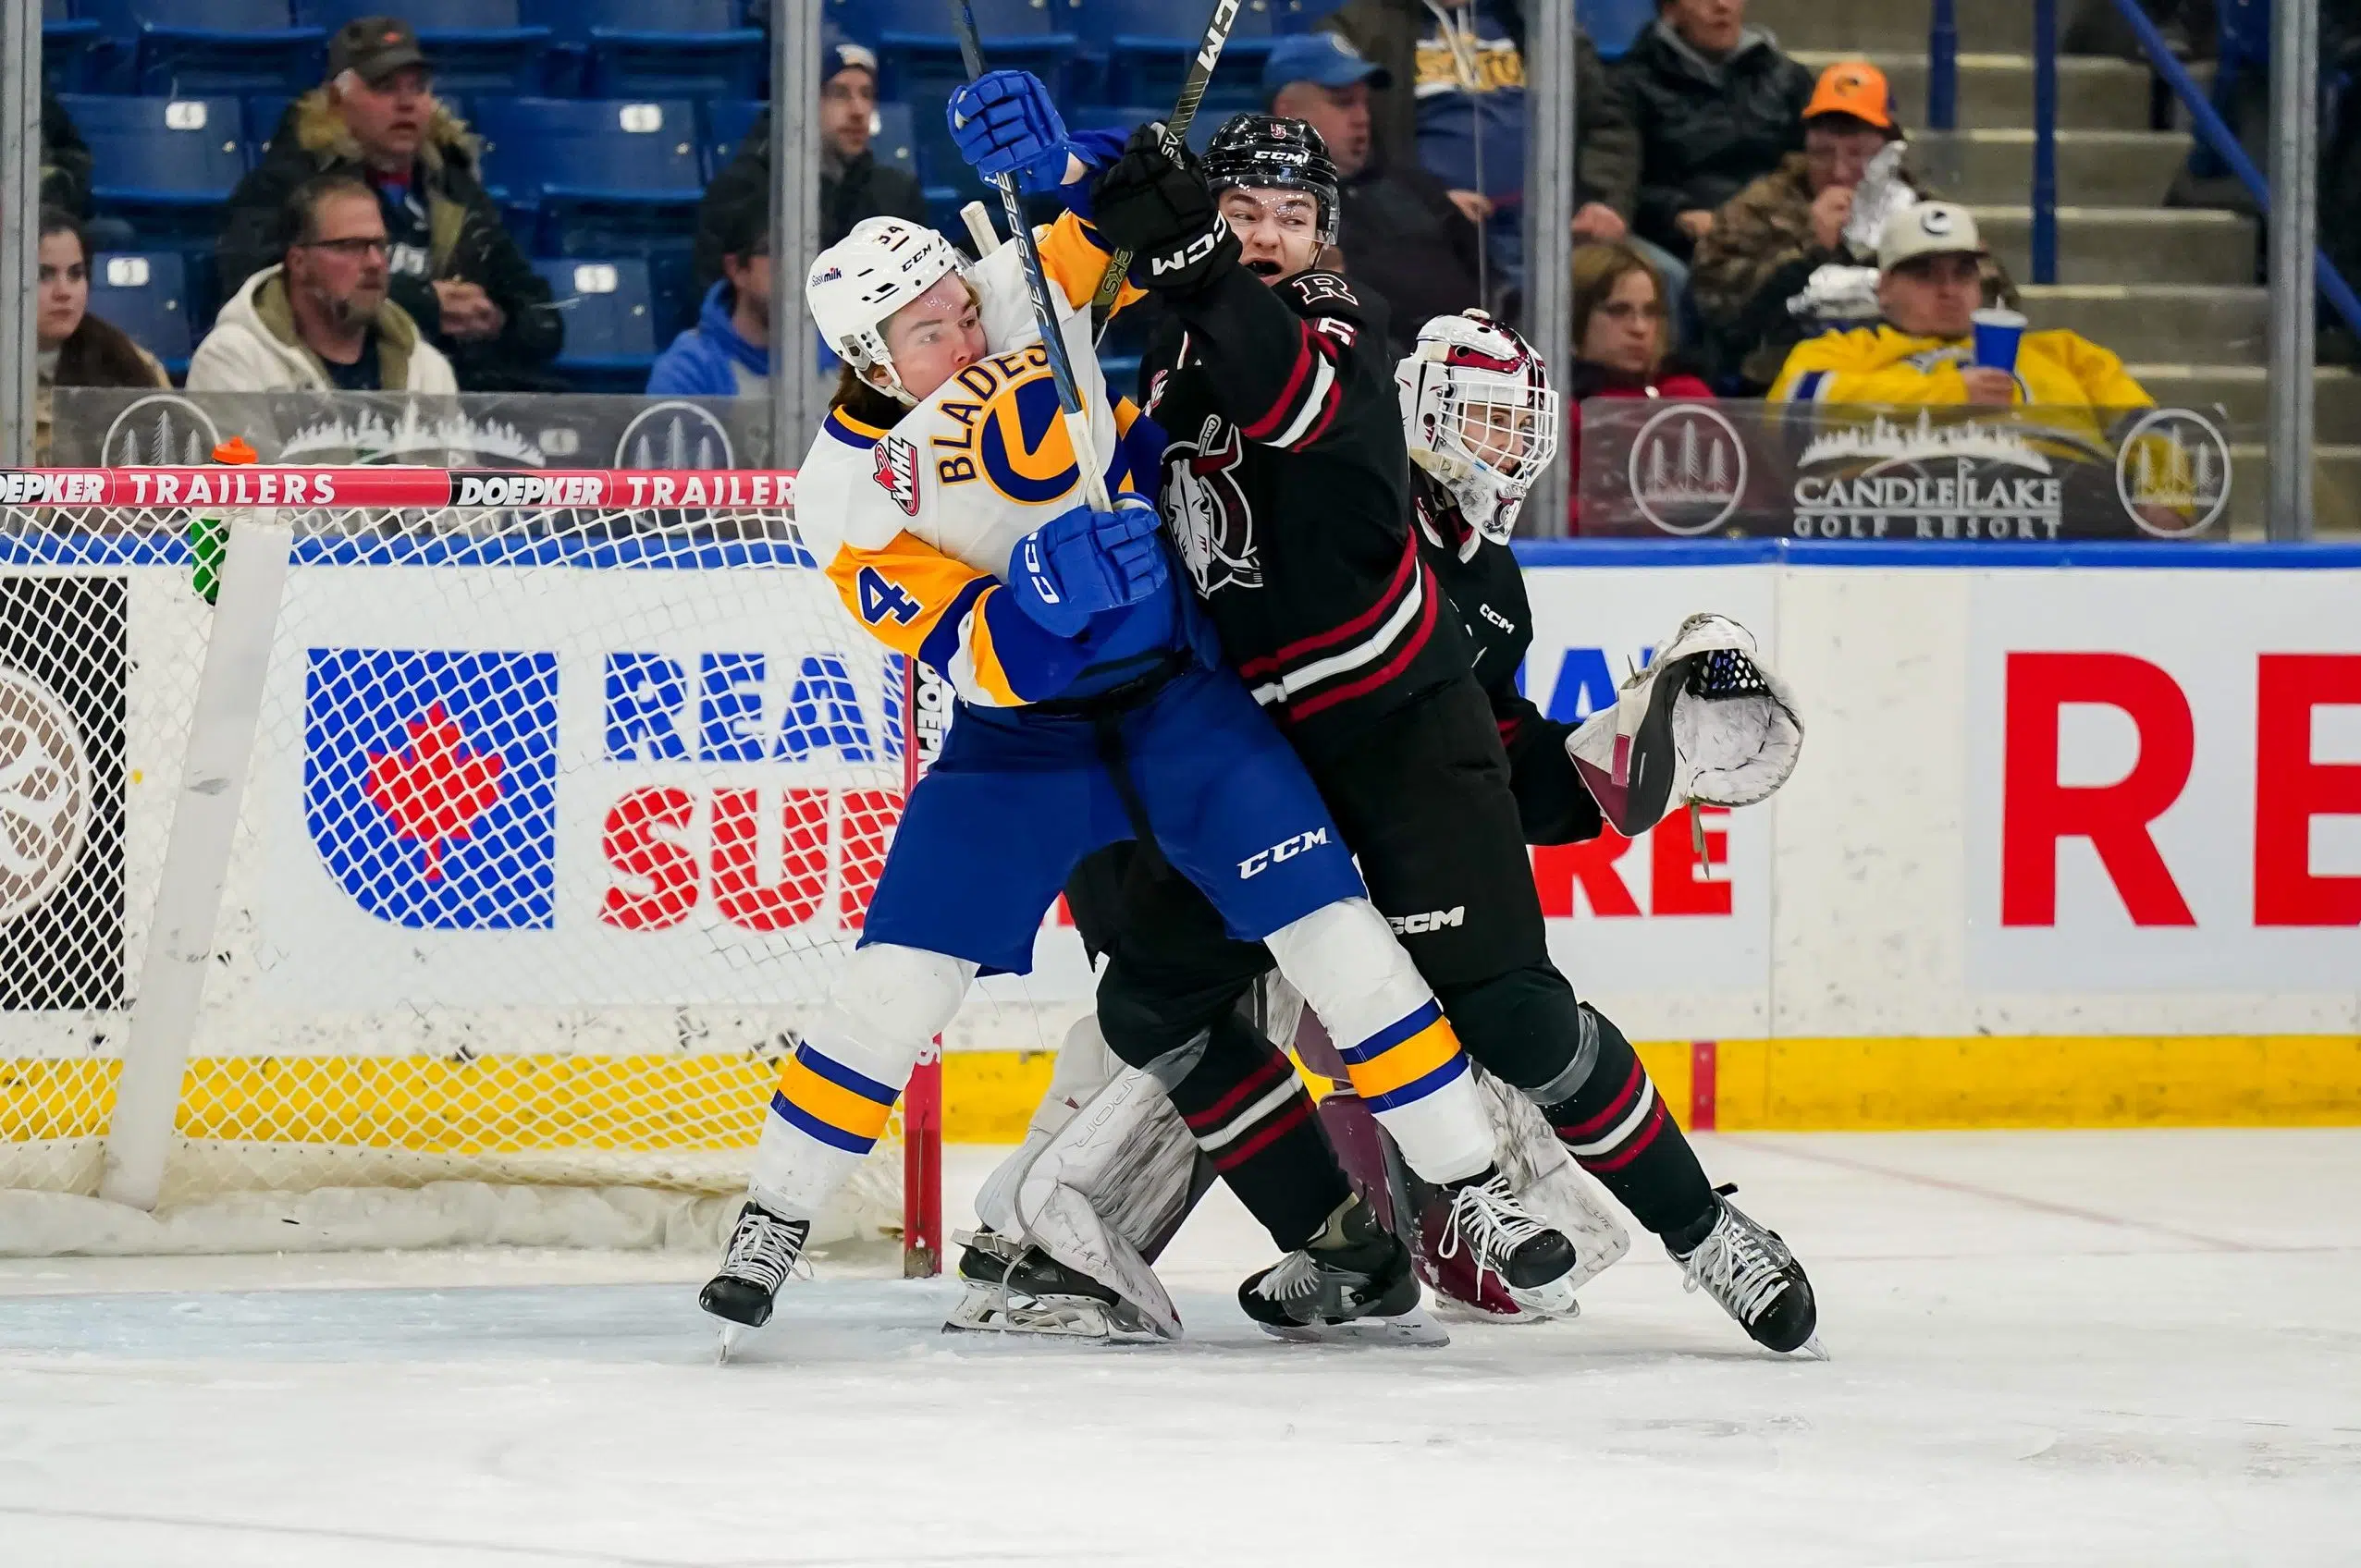 Blades ready for Rebels in second round of WHL playoffs